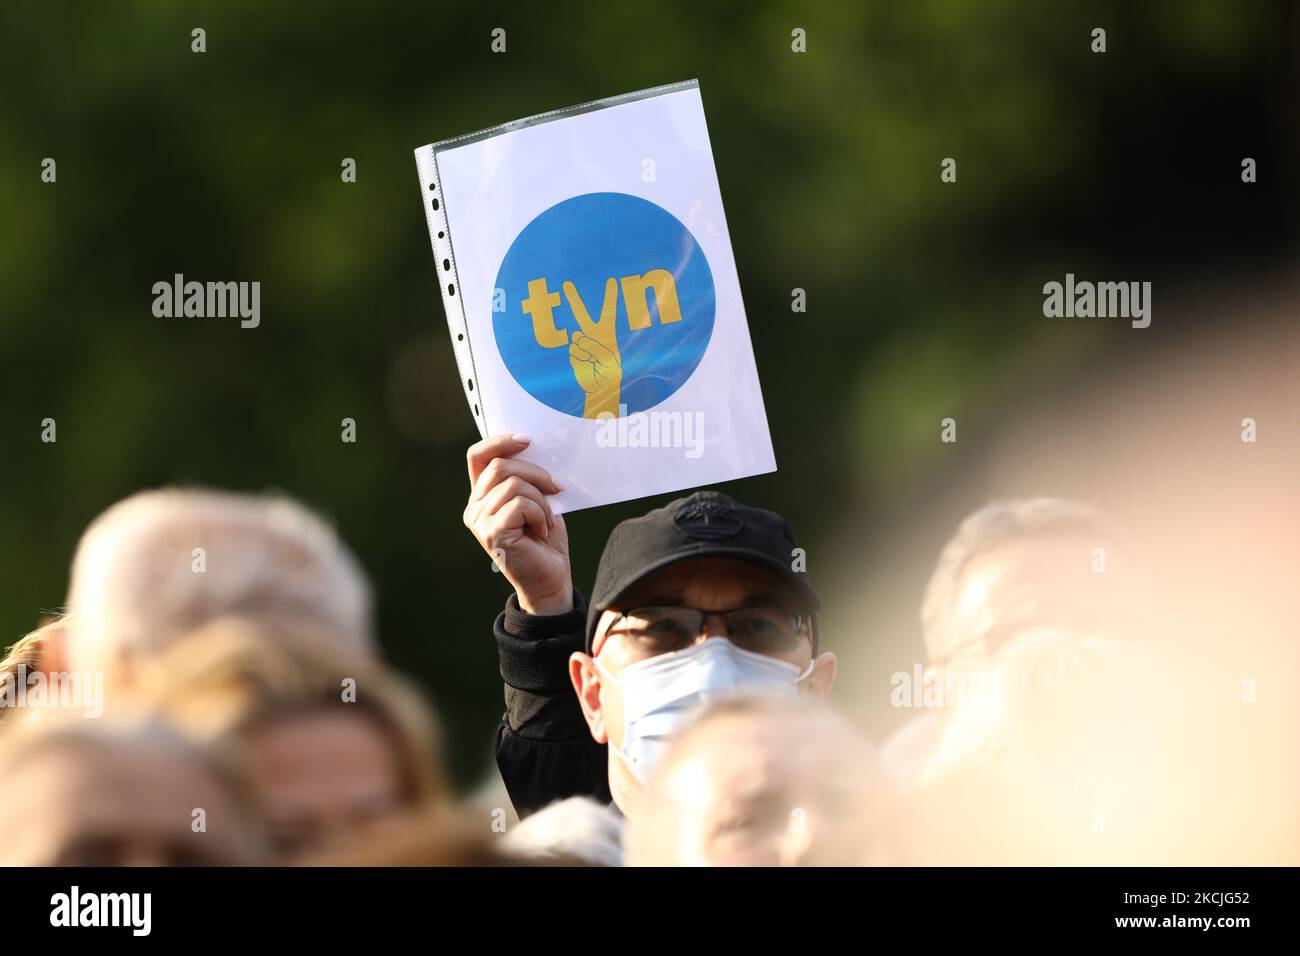 A demonstrator holds up a sign with the TVN logo modified with the communist era V sign indicating solidarity and freedom in Warsaw, Poland on August 10, 2021. Over a thousand people gathered in front of the Sejm, the Polish parliament to protest a law proposal that would ban foreign ownership of media entities. In this case people came out to support the American owned TVN broadcaster whose license will expire in September. The government has indicated it will not renew the license under the current ownership structure, a move critics say could mean the end of independen media in Poland. (Pho Stock Photo